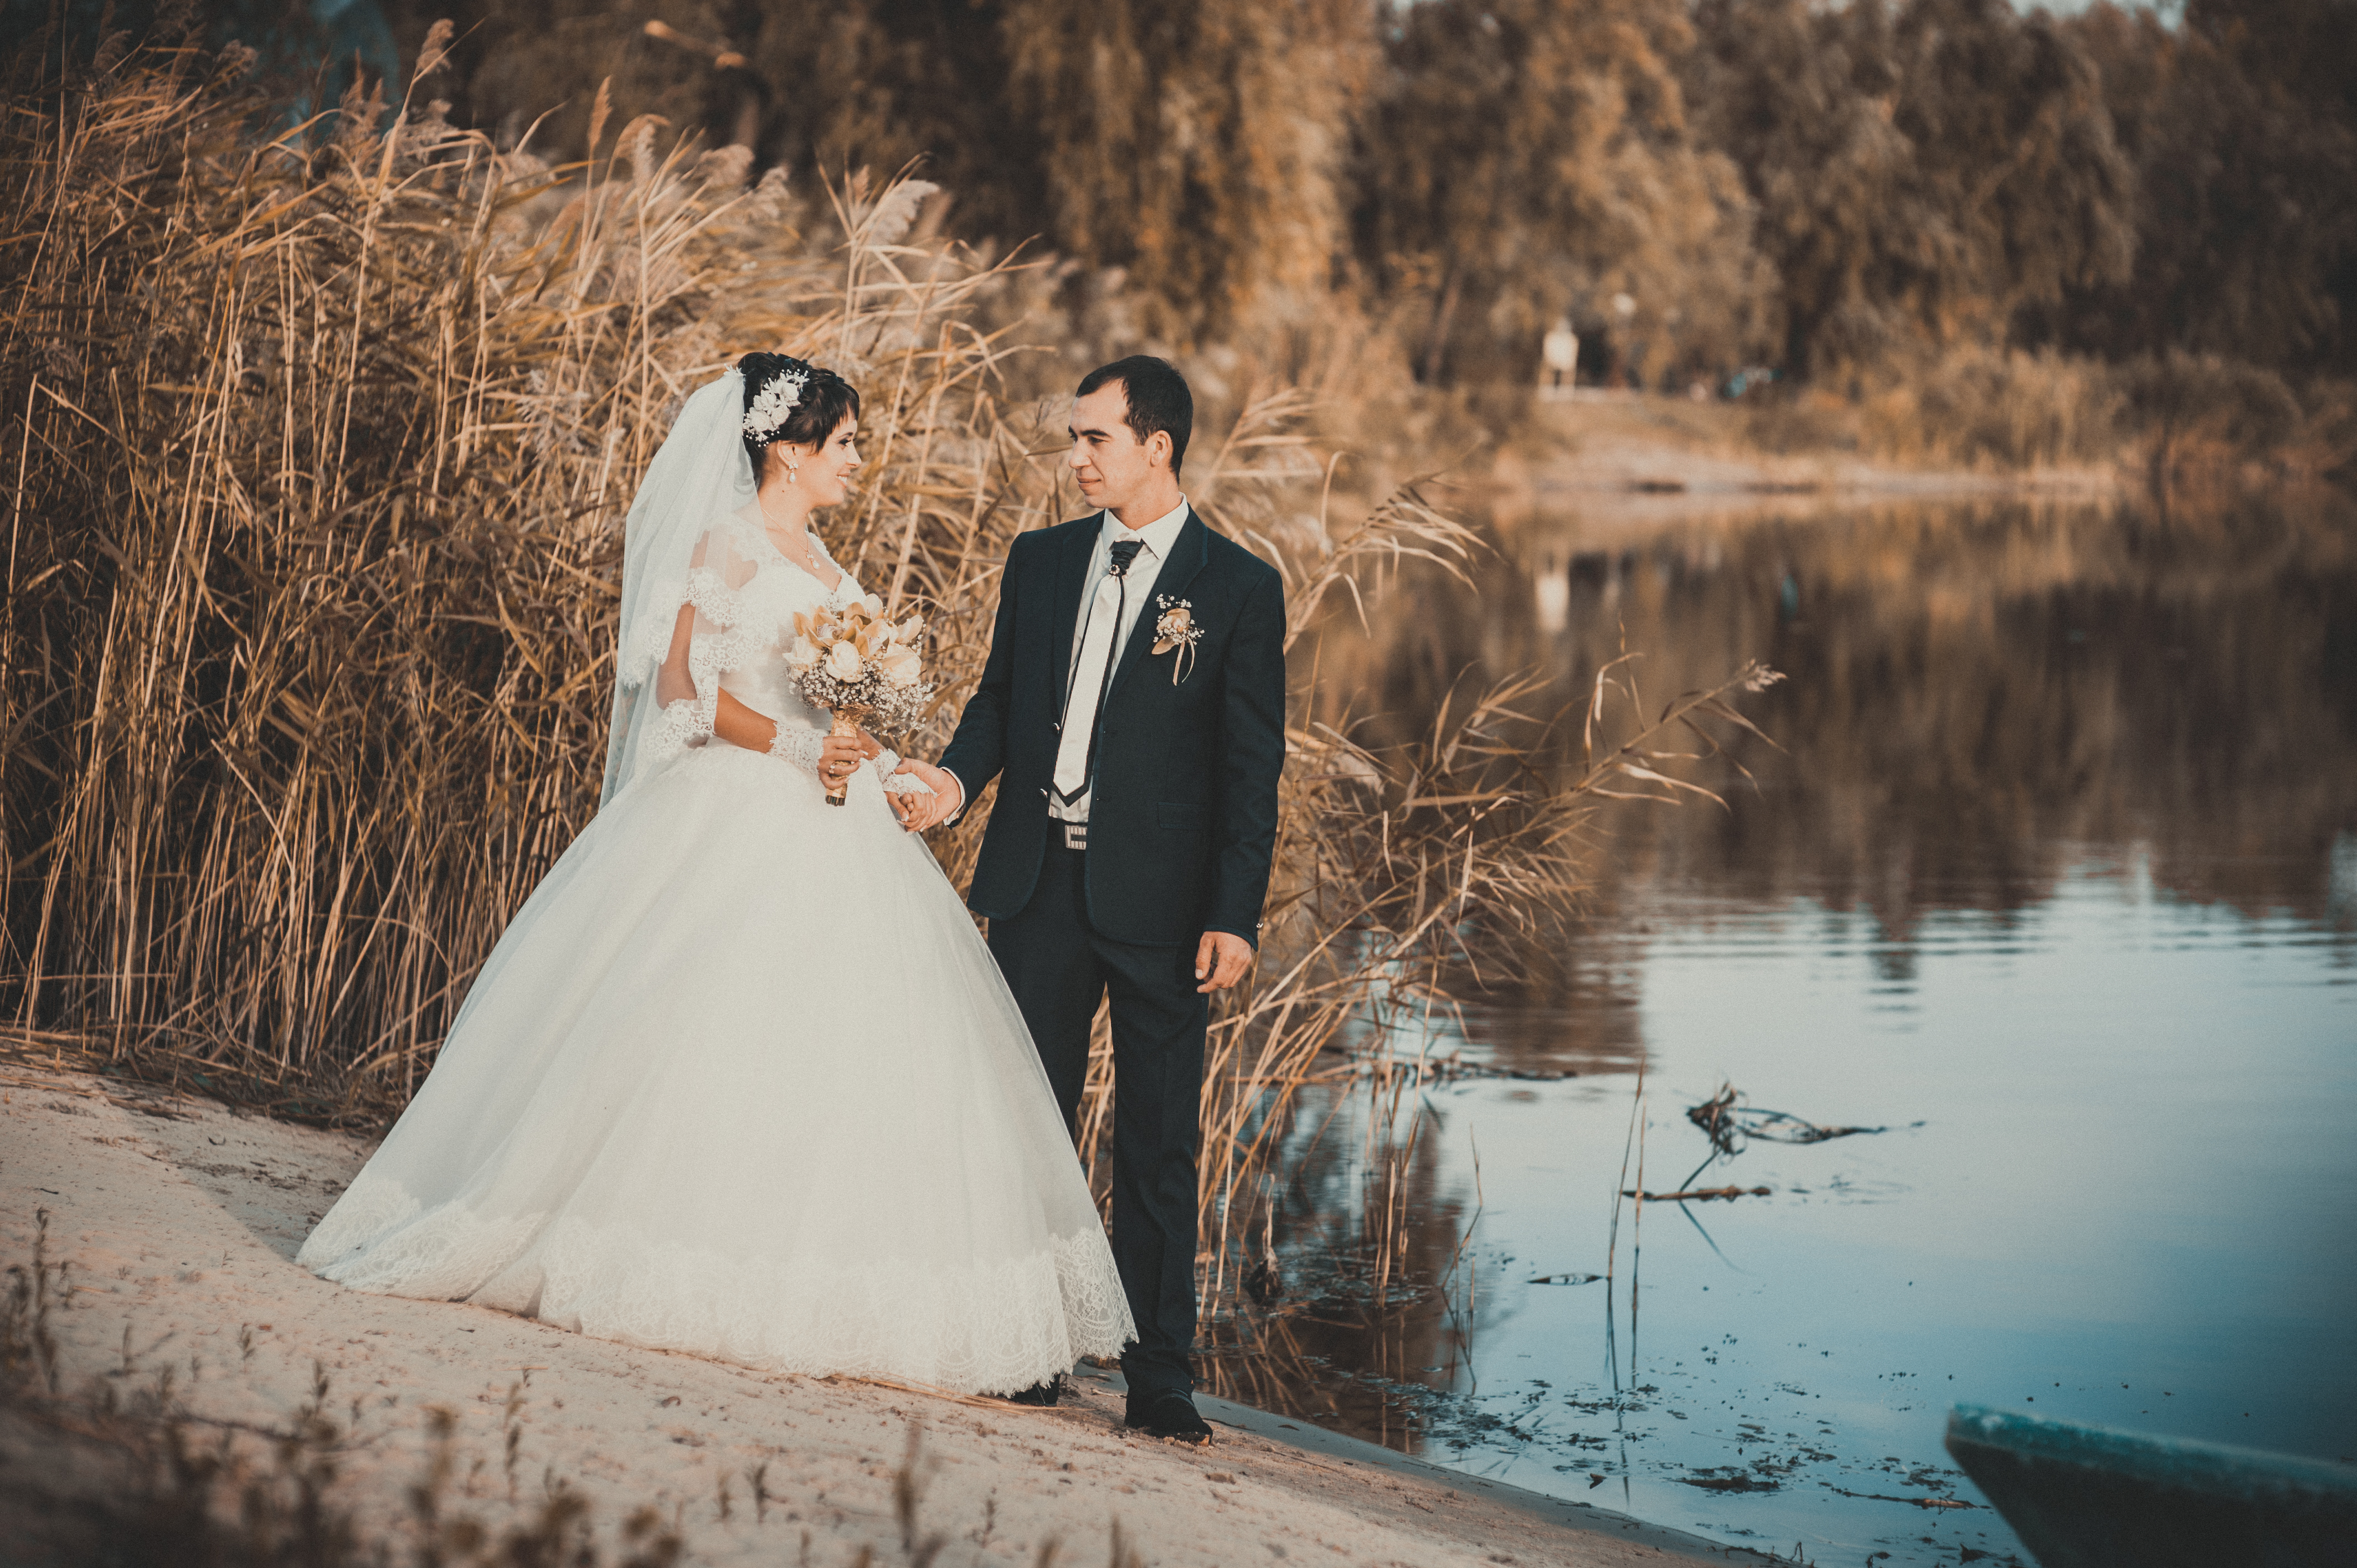 wedding: bride and groom on the seashore. Honeymoon. The bride and groom hugging on the shore of Lake. groom and bride hugging on a green lake. Groom and Bride in a park. wedding dress. Bridal wedding bouquet of flowers